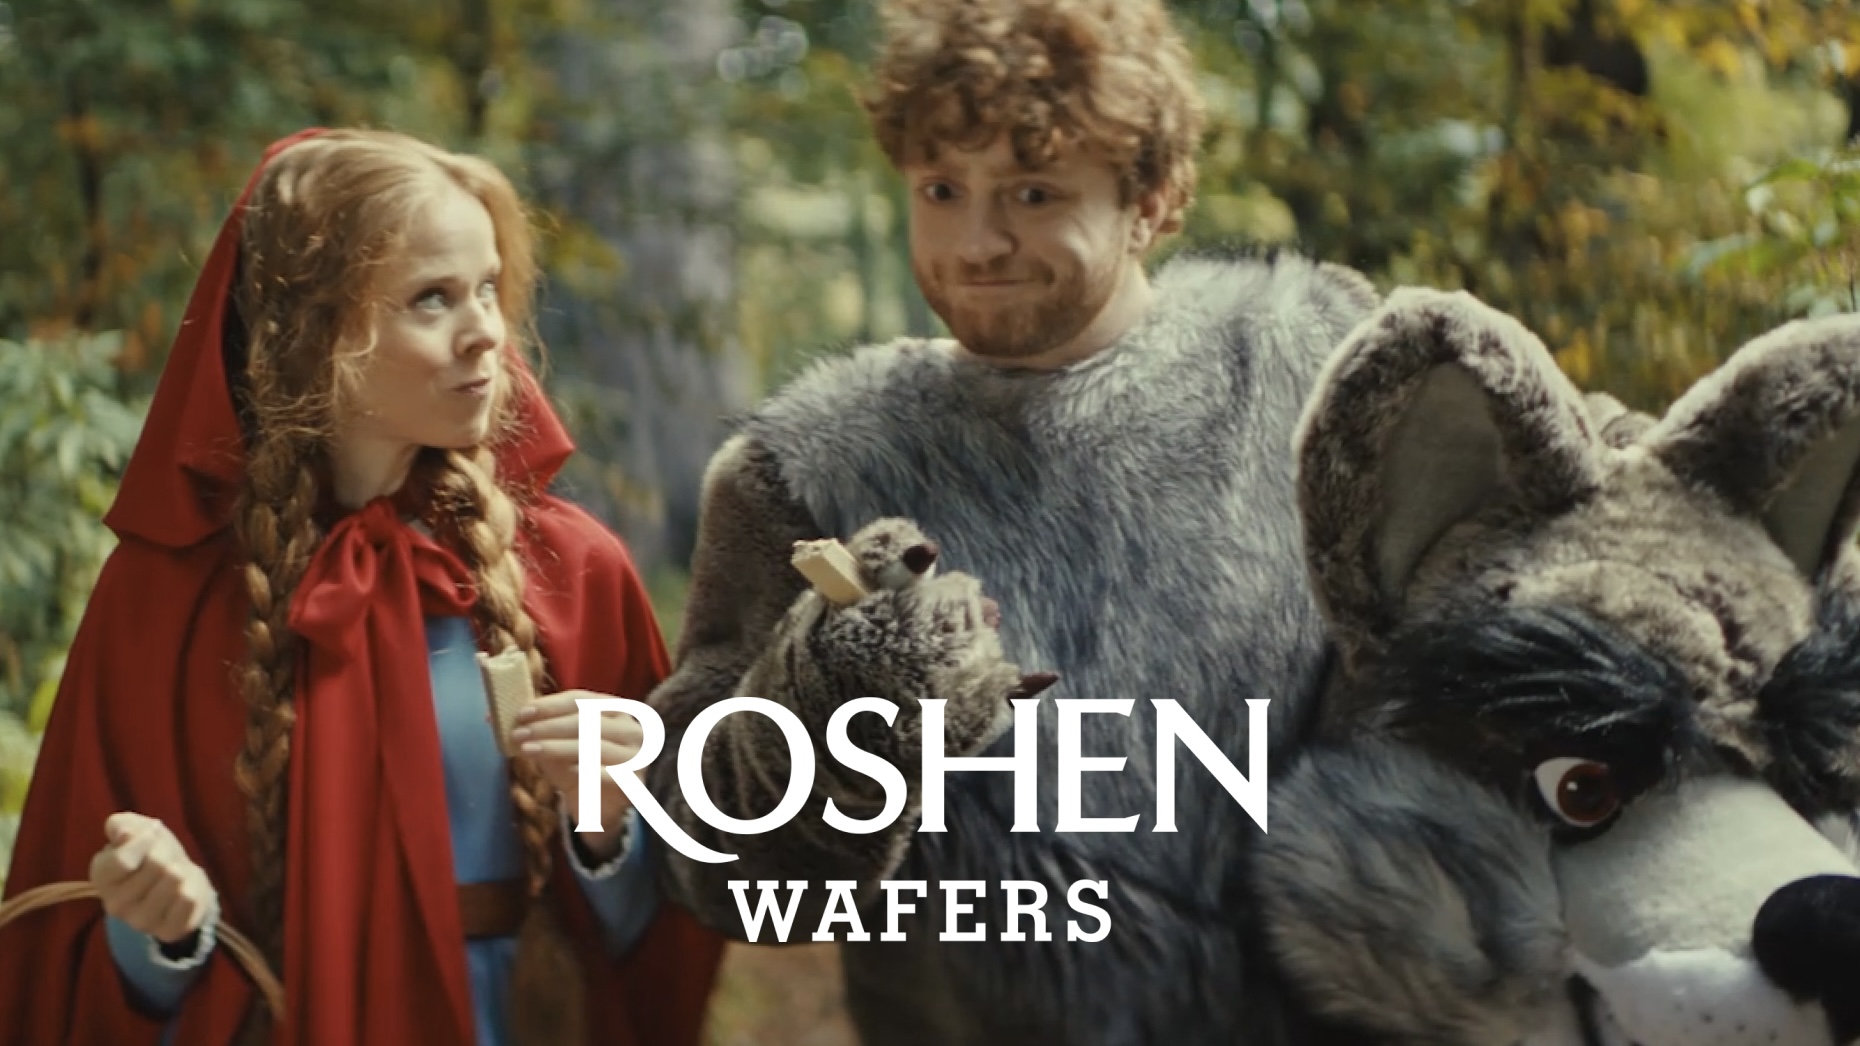 Red Riding Hood for Roshen Wafers